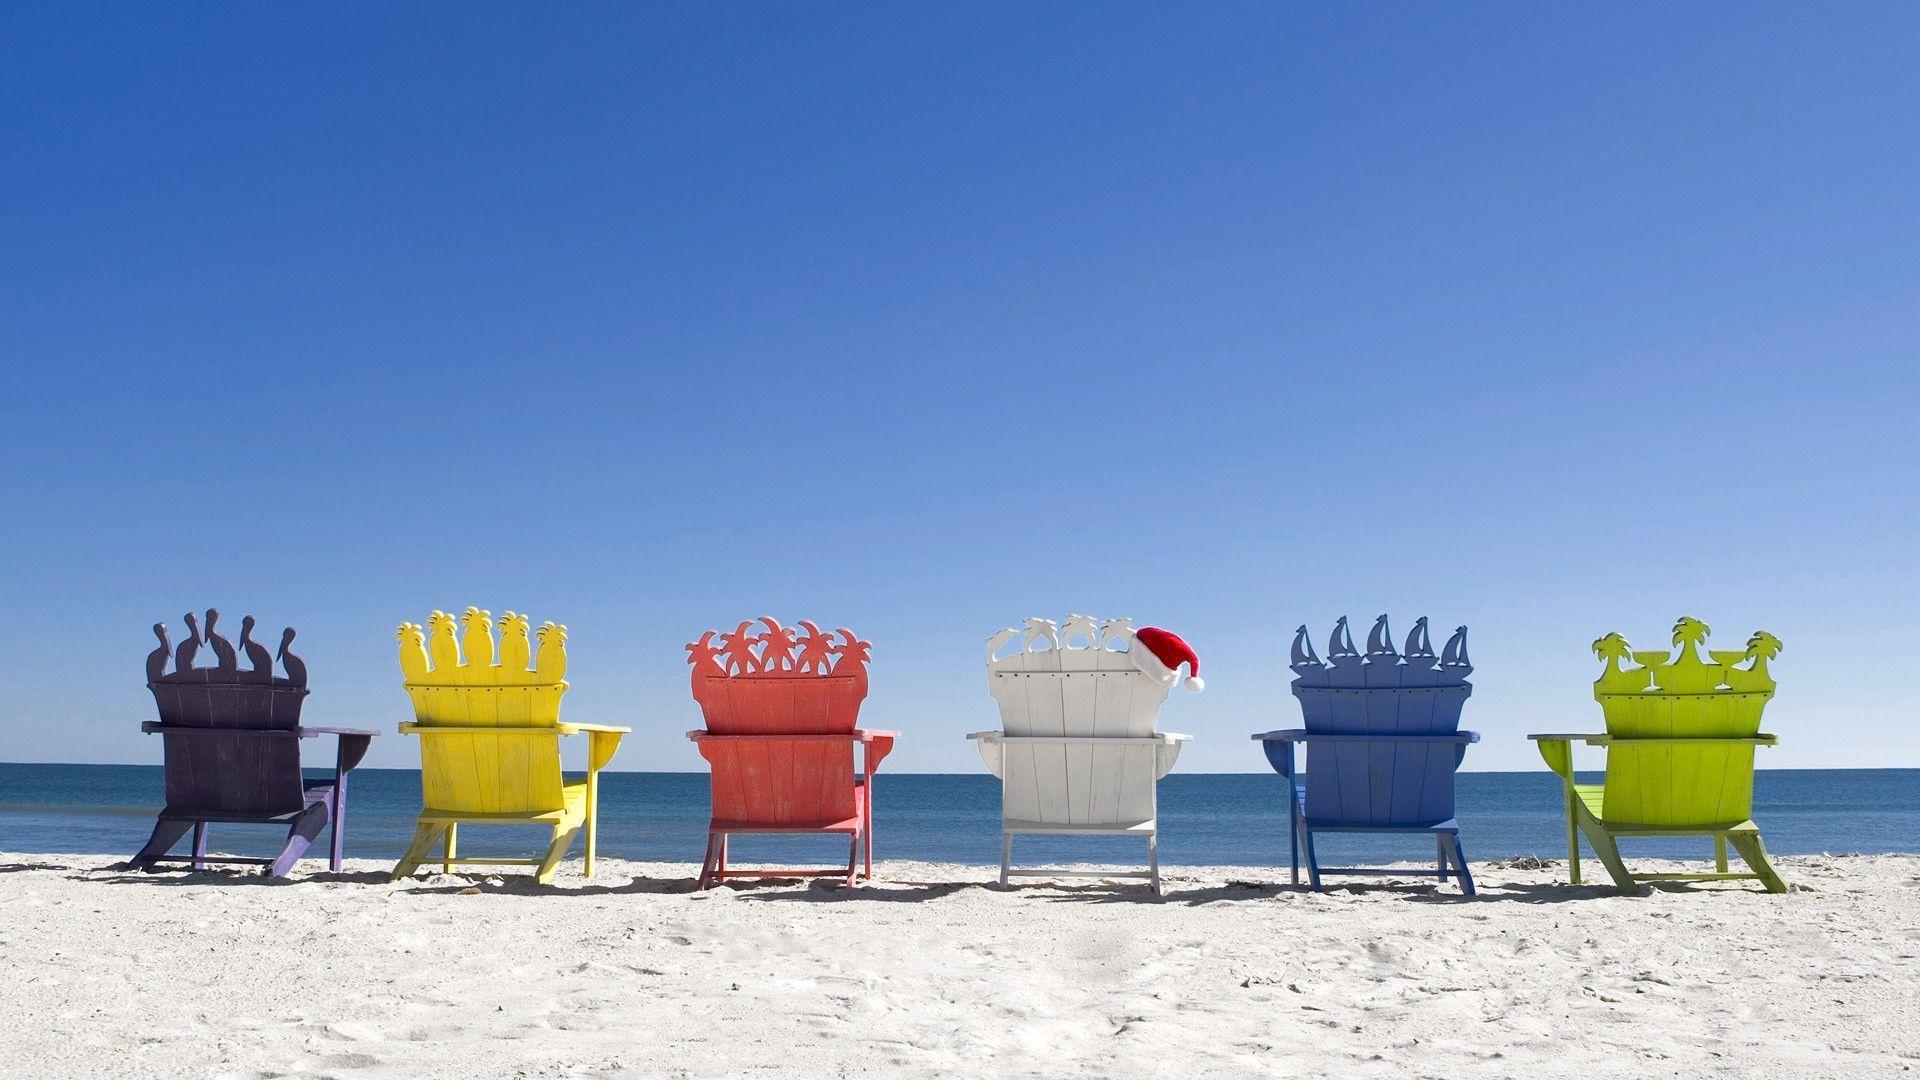 Beaches With Chairs Wallpaper